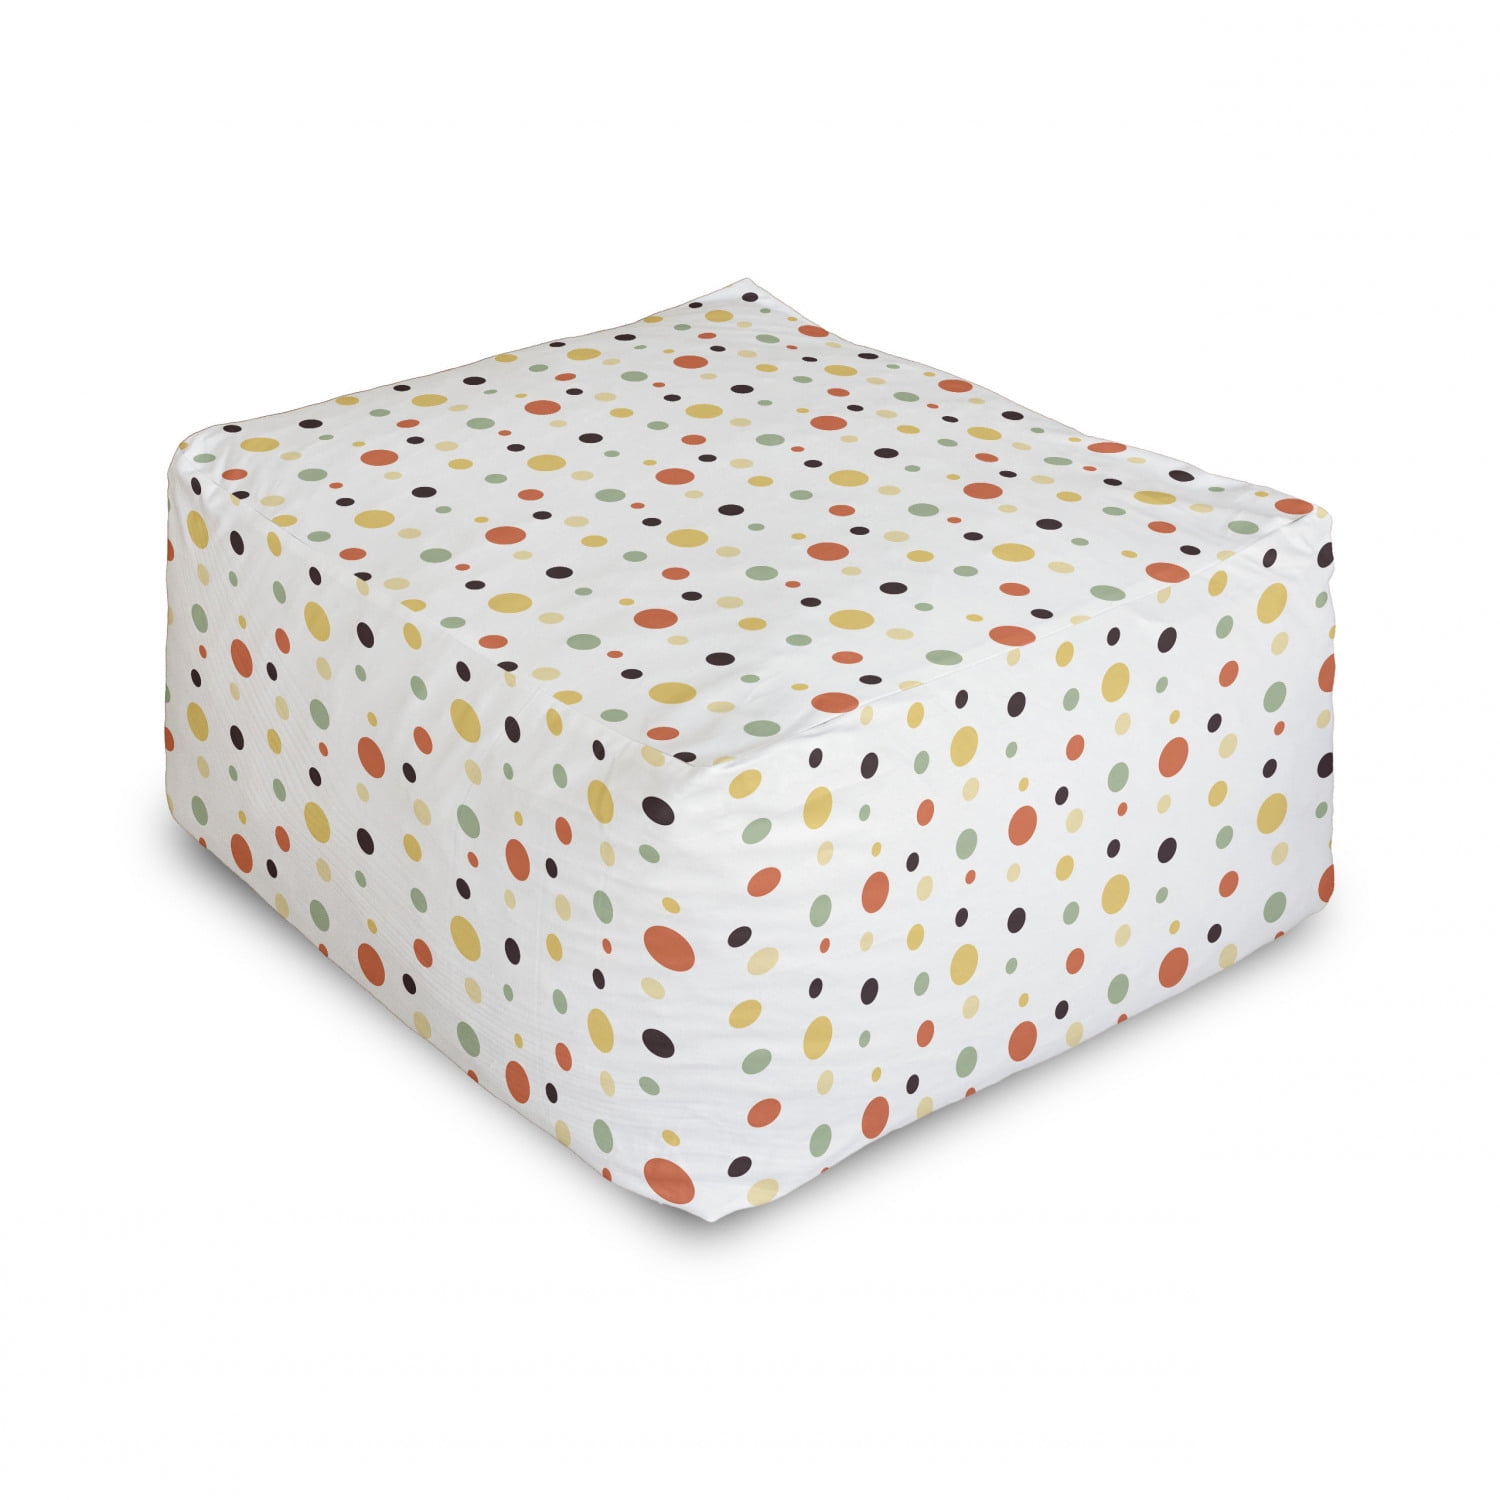 Ambesonne Colorful Rectangle Pouf Under Desk Foot Stool for Living Room Office Ottoman with Cover 25 Multicolor Beetles Inside Square Boxes of Polka Dots Stripes Funky Insects Design Print